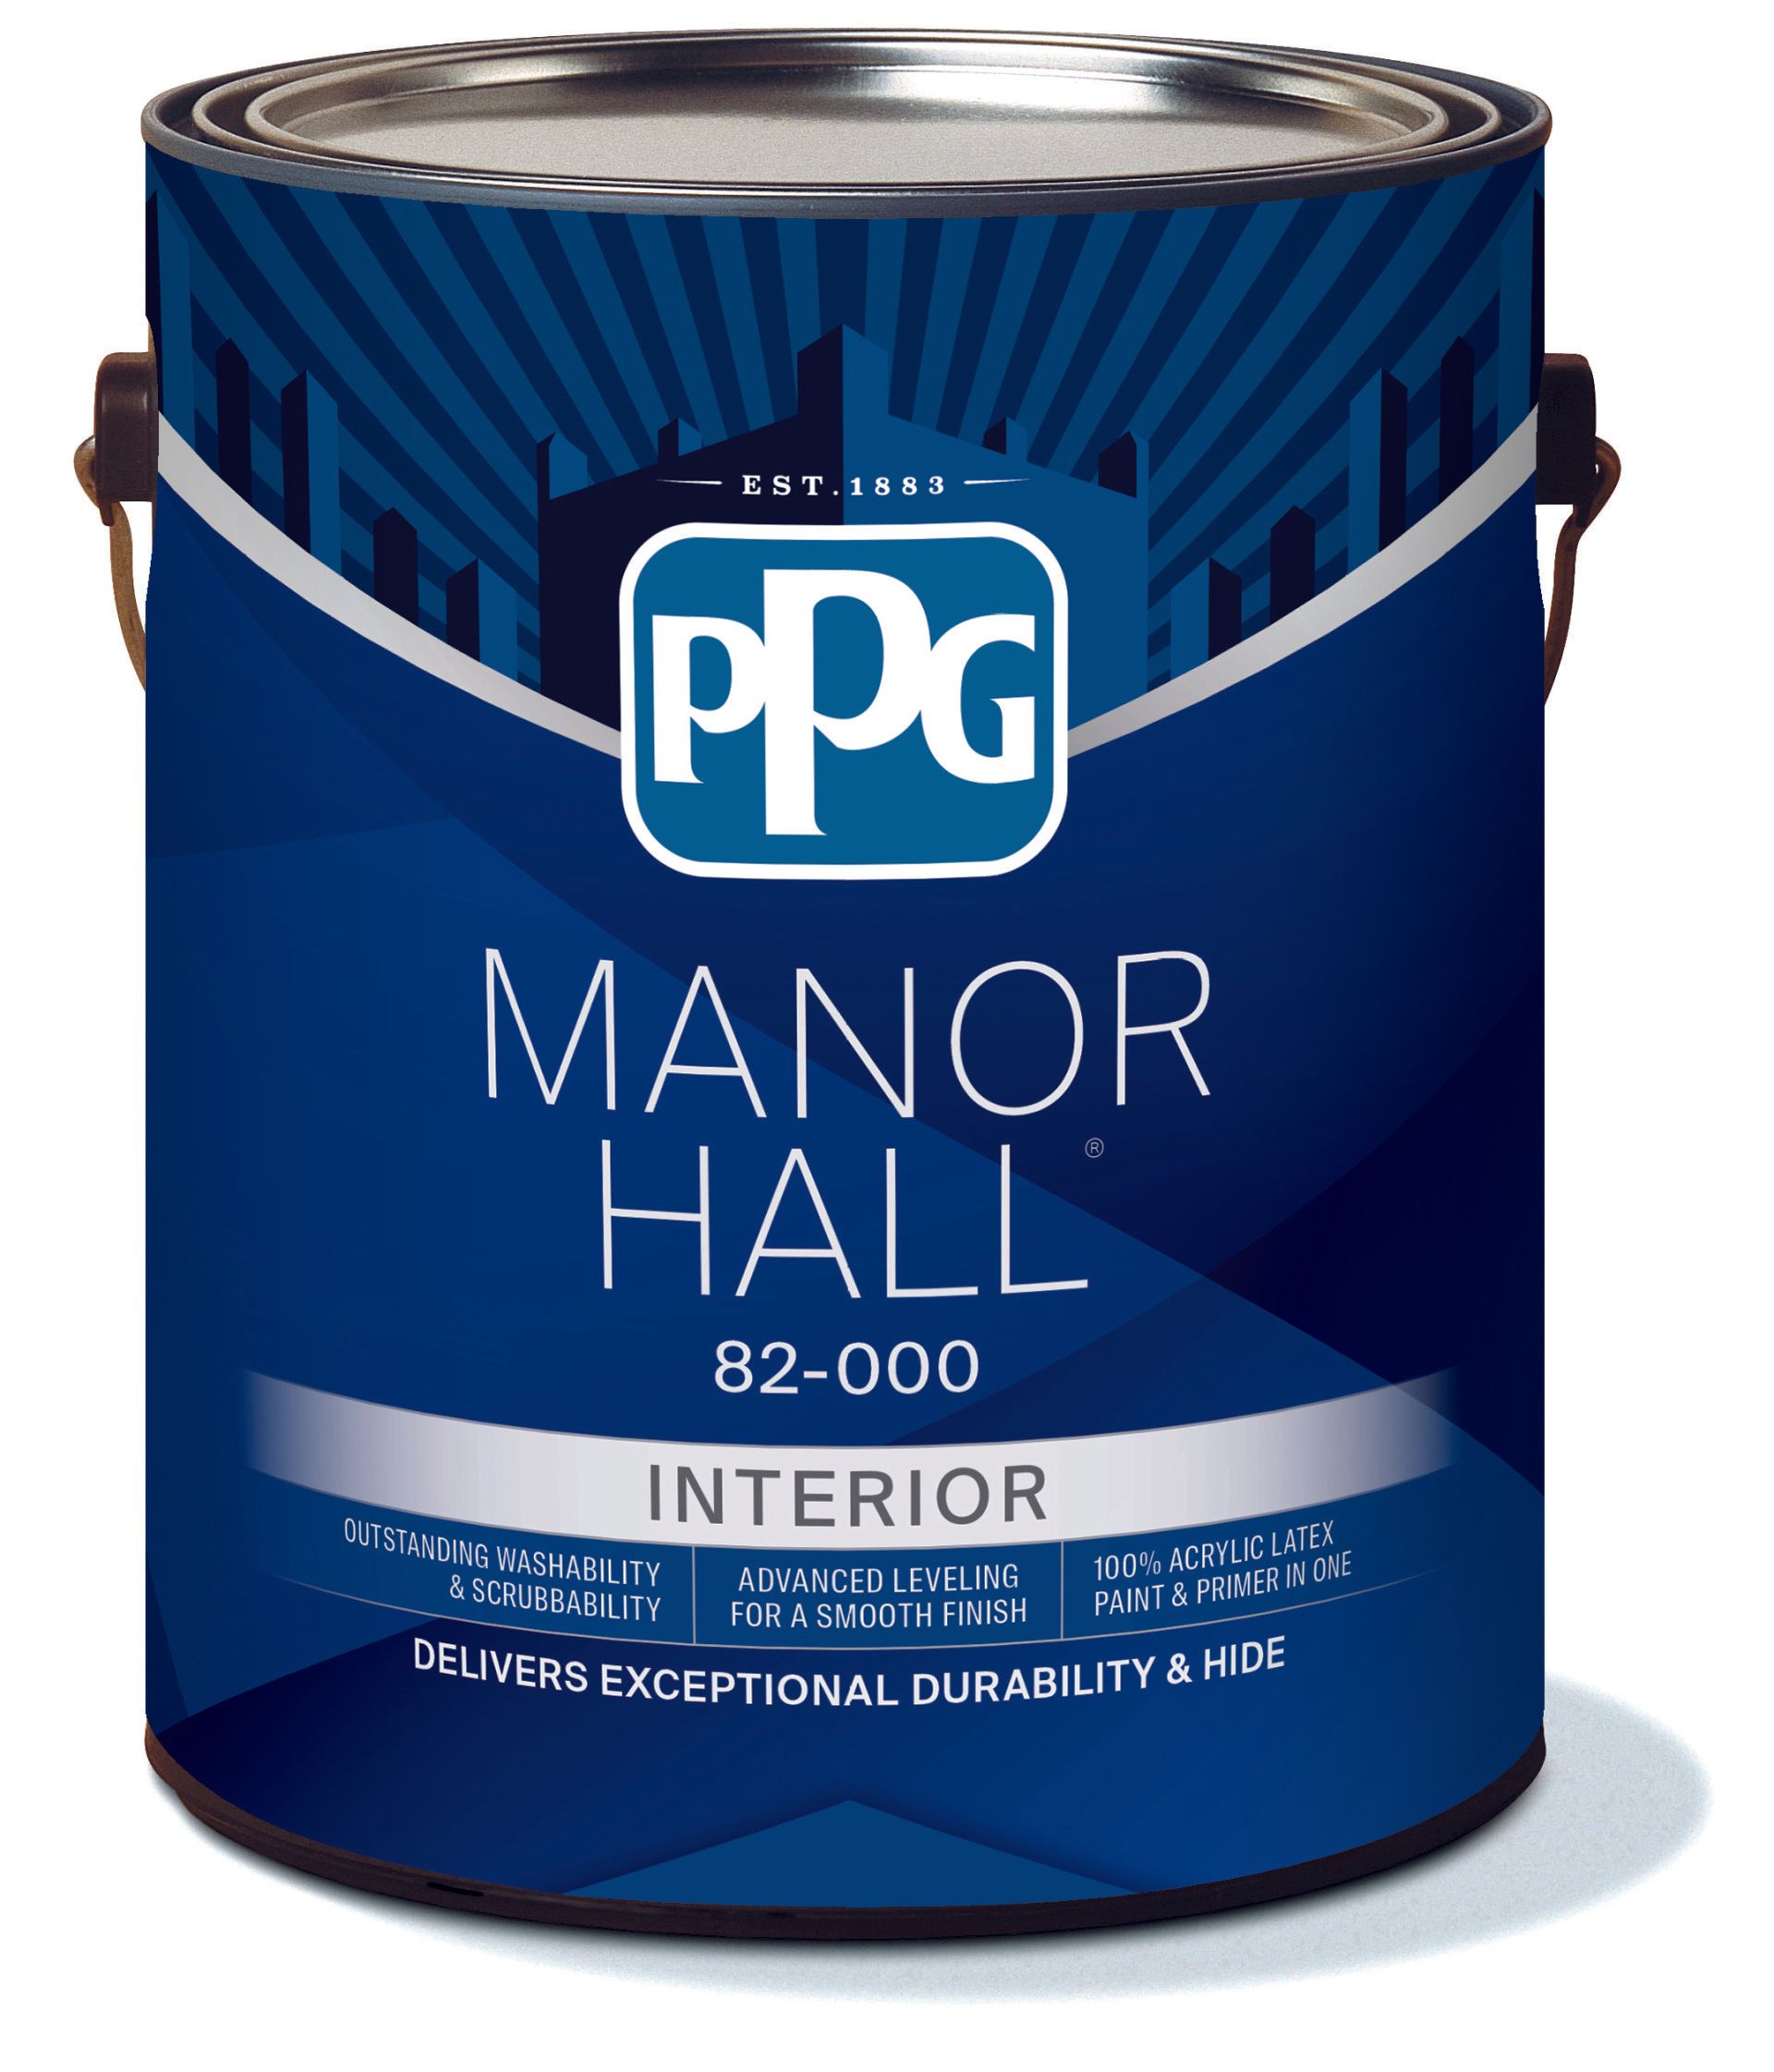 MANOR HALL® Interior Latex from PPG at 21st Century Paints near Holland, Ohio (OH)